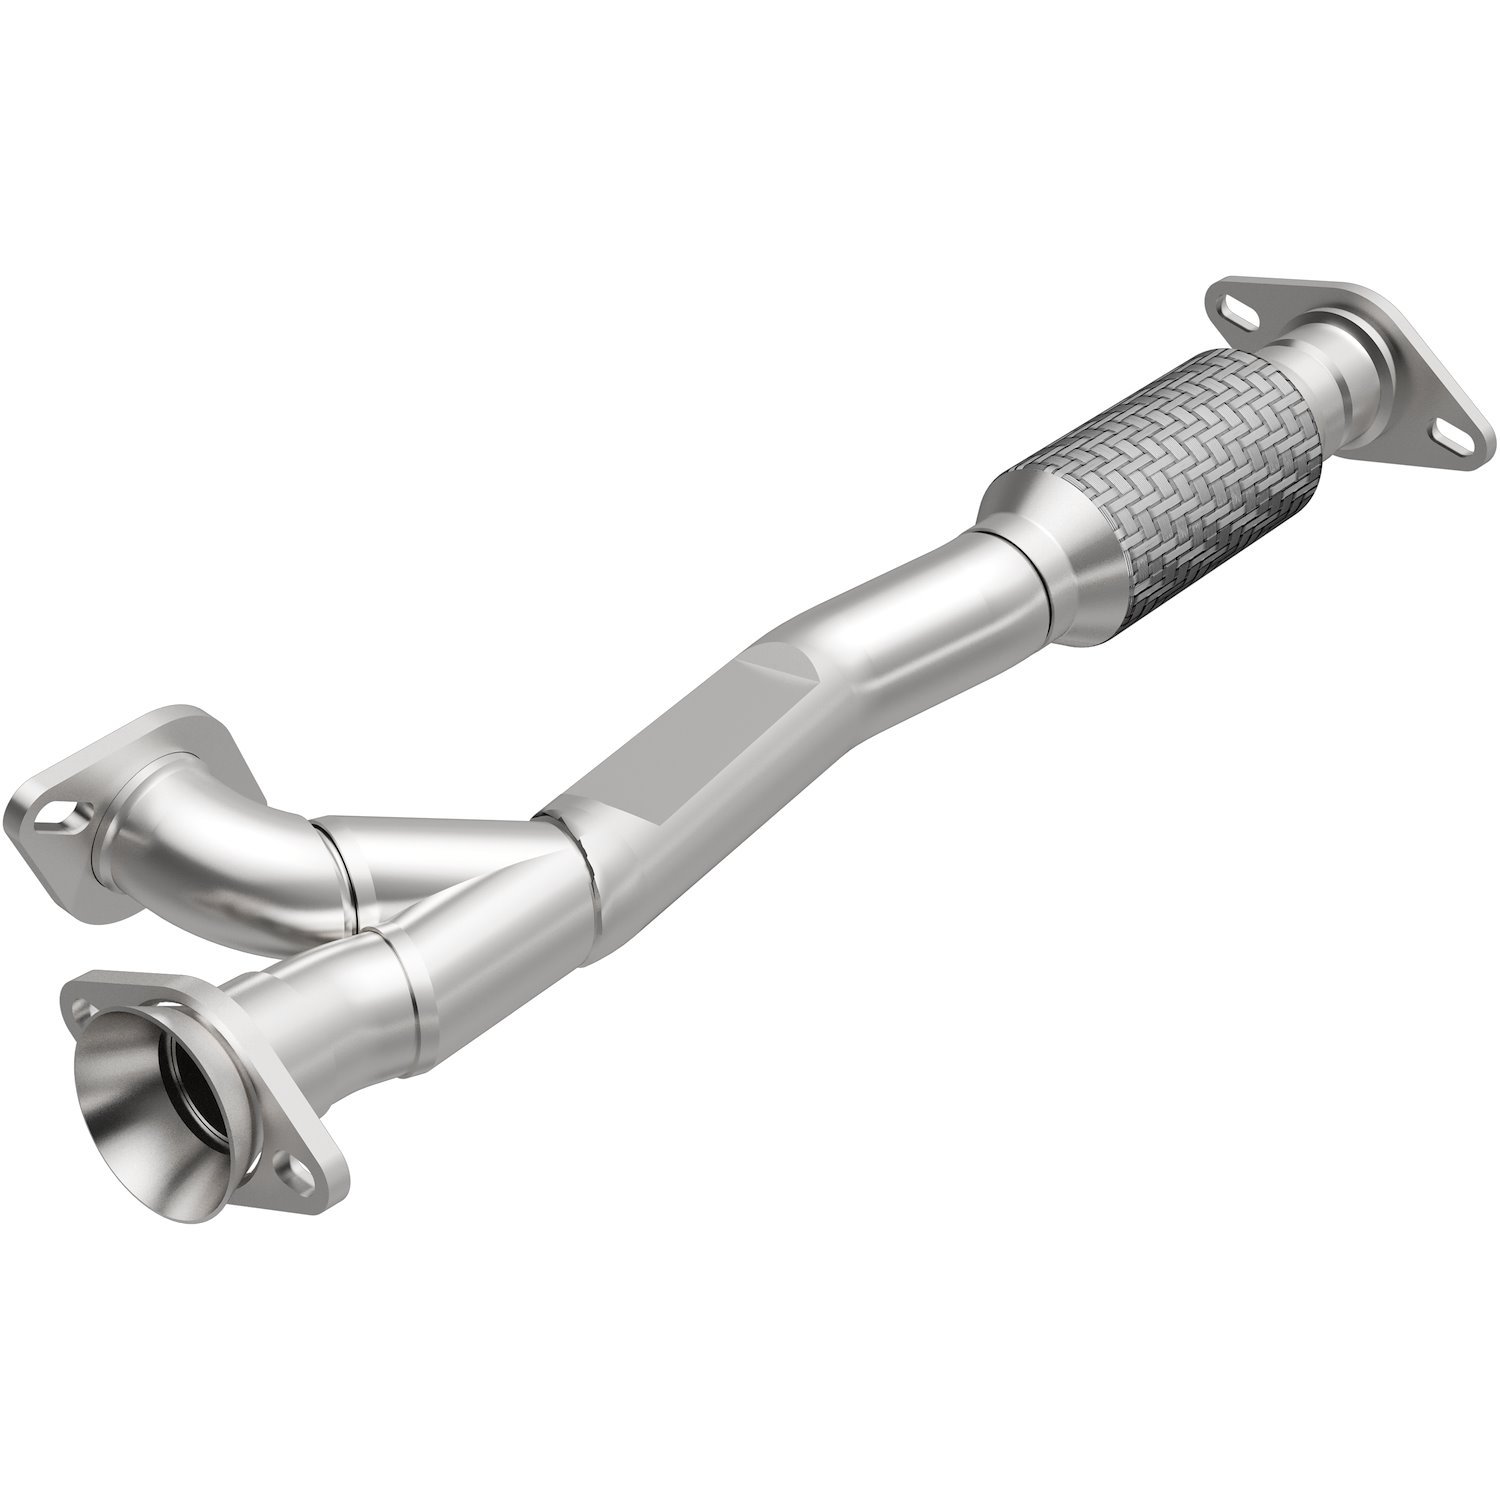 Direct-Fit Exhaust Intermediate Pipe, 2006-2012 Ford Fusion, Mercury Milan, Lincoln Zephyr 3.0L